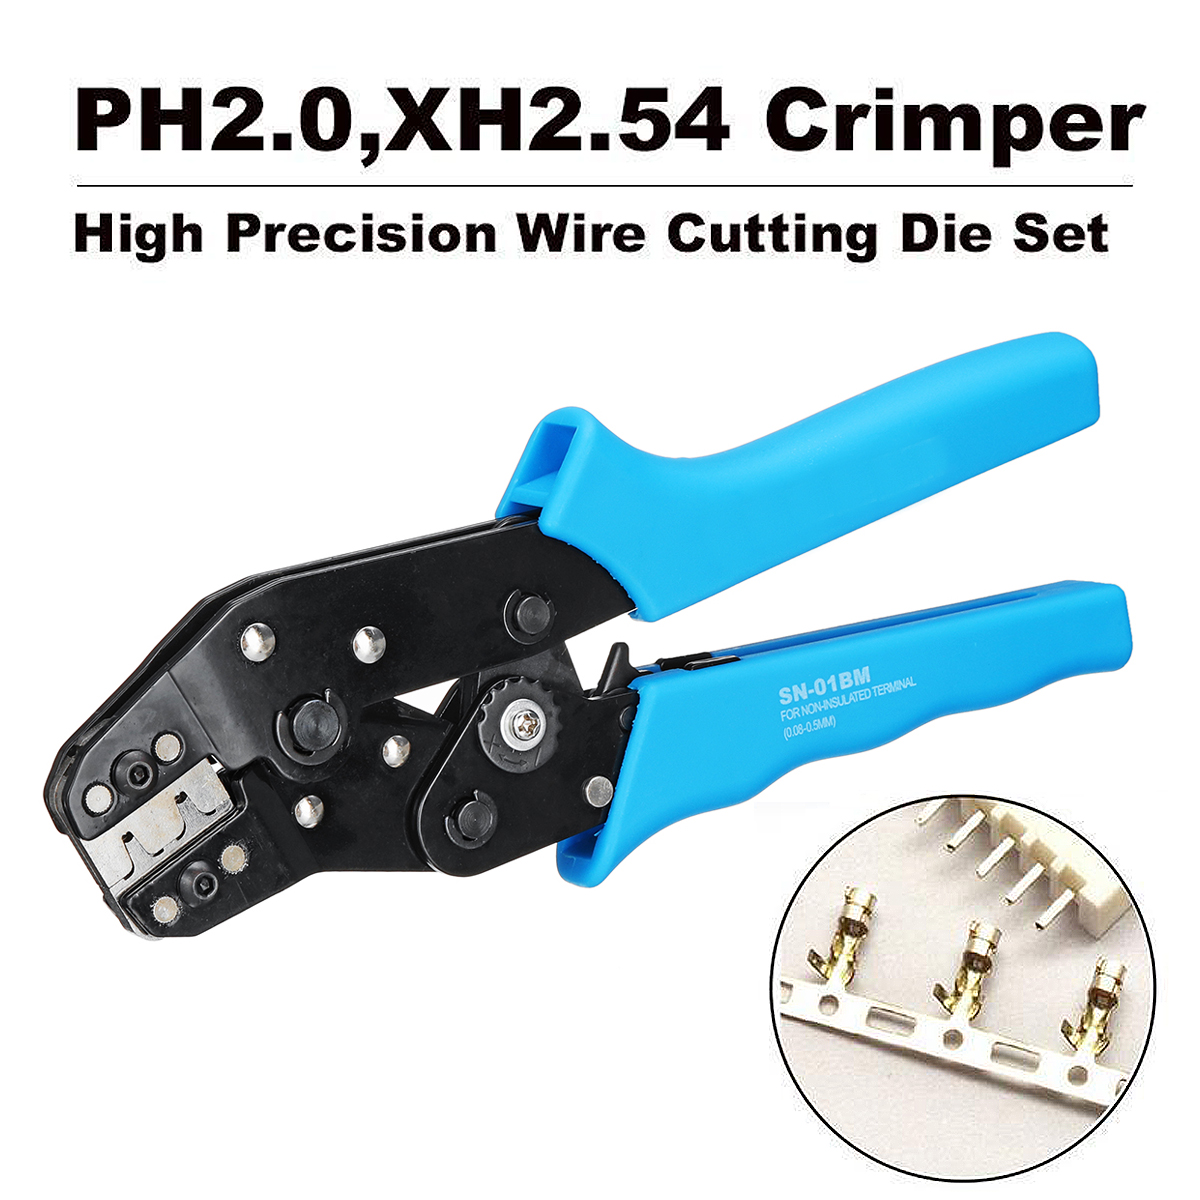 SN-01BM AWG28-20 Self-adjusting Terminal Wire Cable Crimping Pliers Tool for Dupont PH2.0 XH2.54 KF2510 JST Molex D-SUB Terminal 7